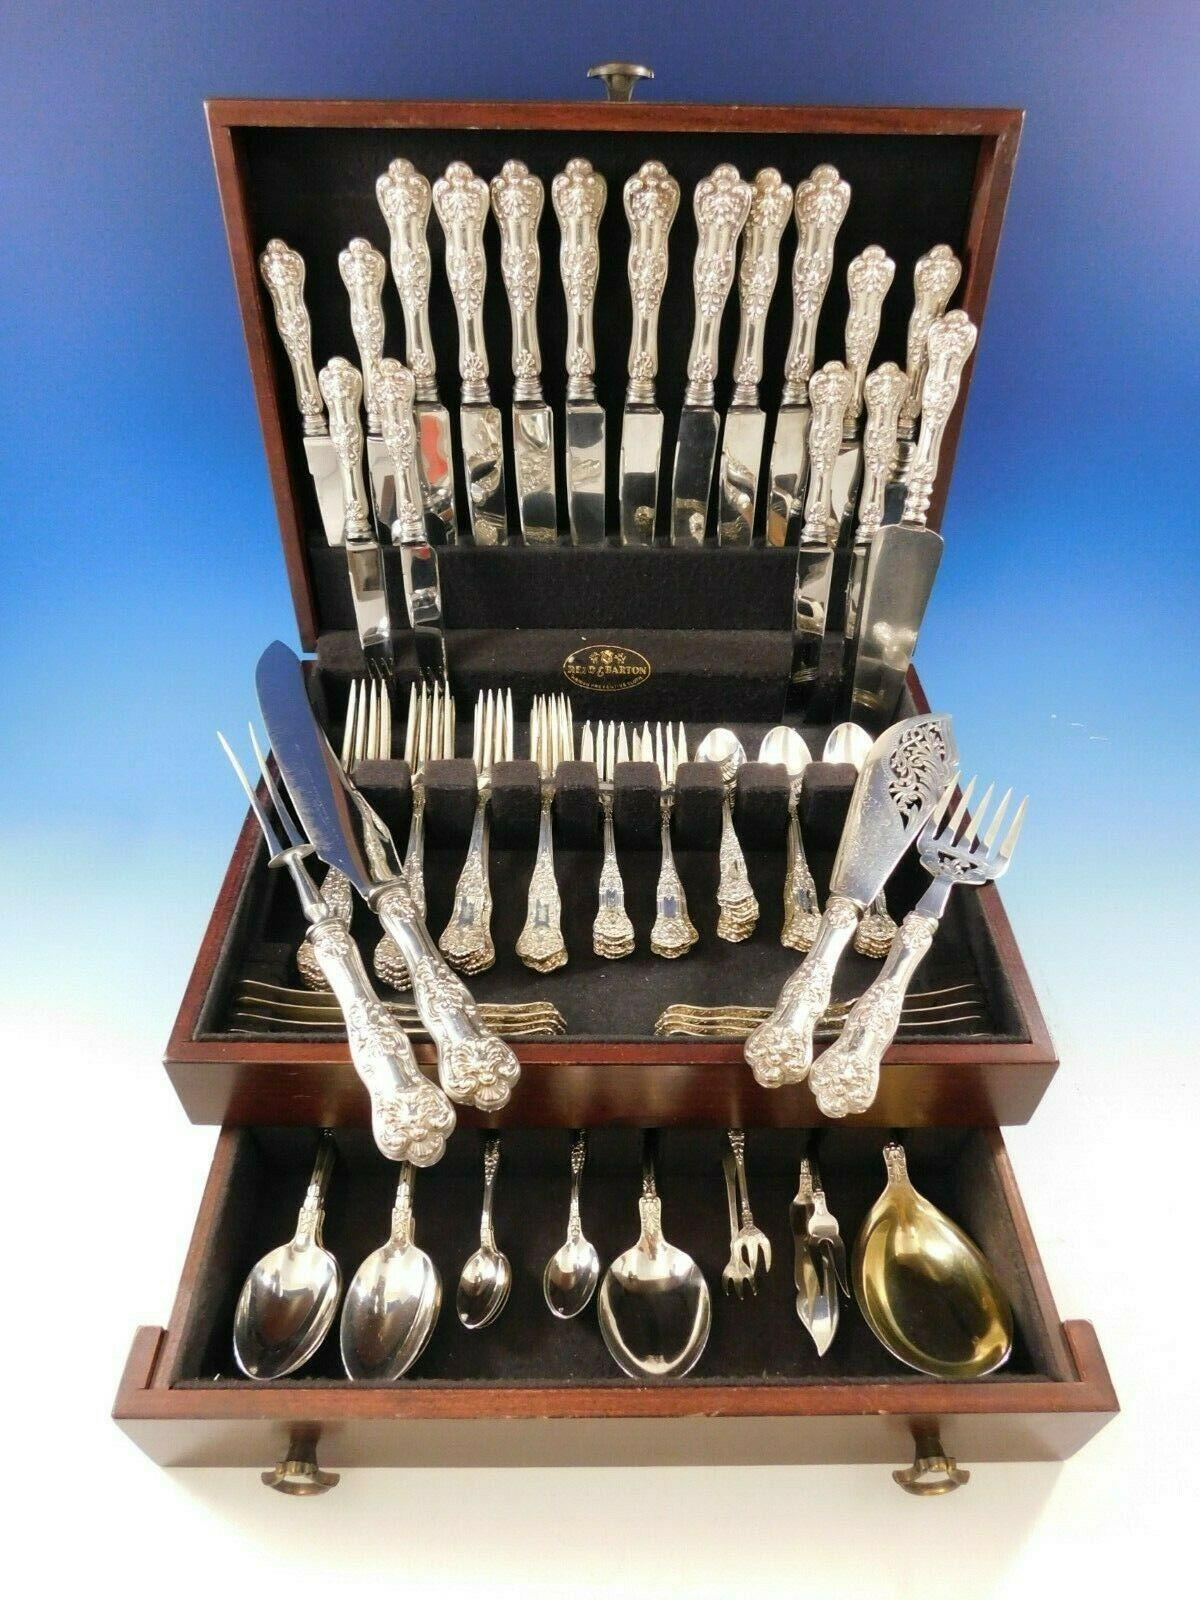 Exceptional Queens by Birks sterling silver dinner and luncheon flatware set - 90 pieces. This set includes:

8 dinner size knives, 10